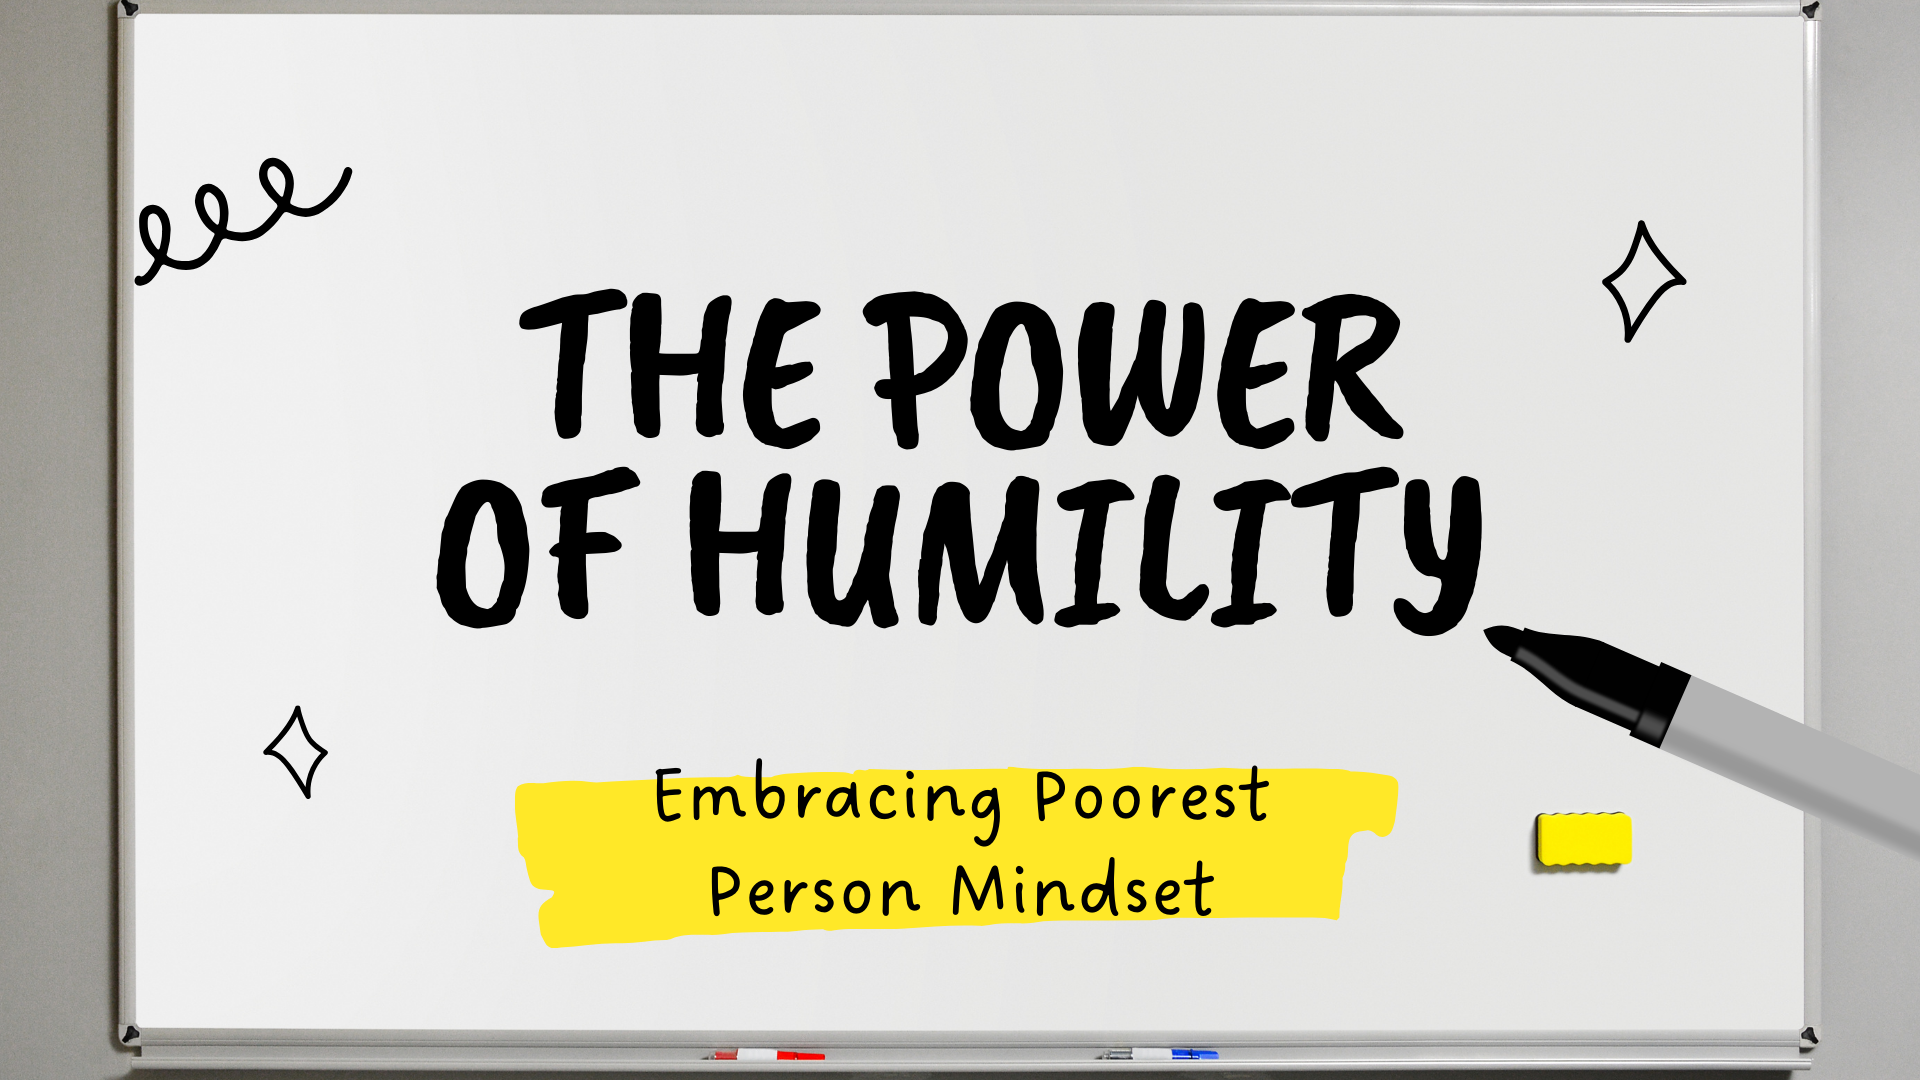 Embracing a “Poorest Person” Mindset for Growth